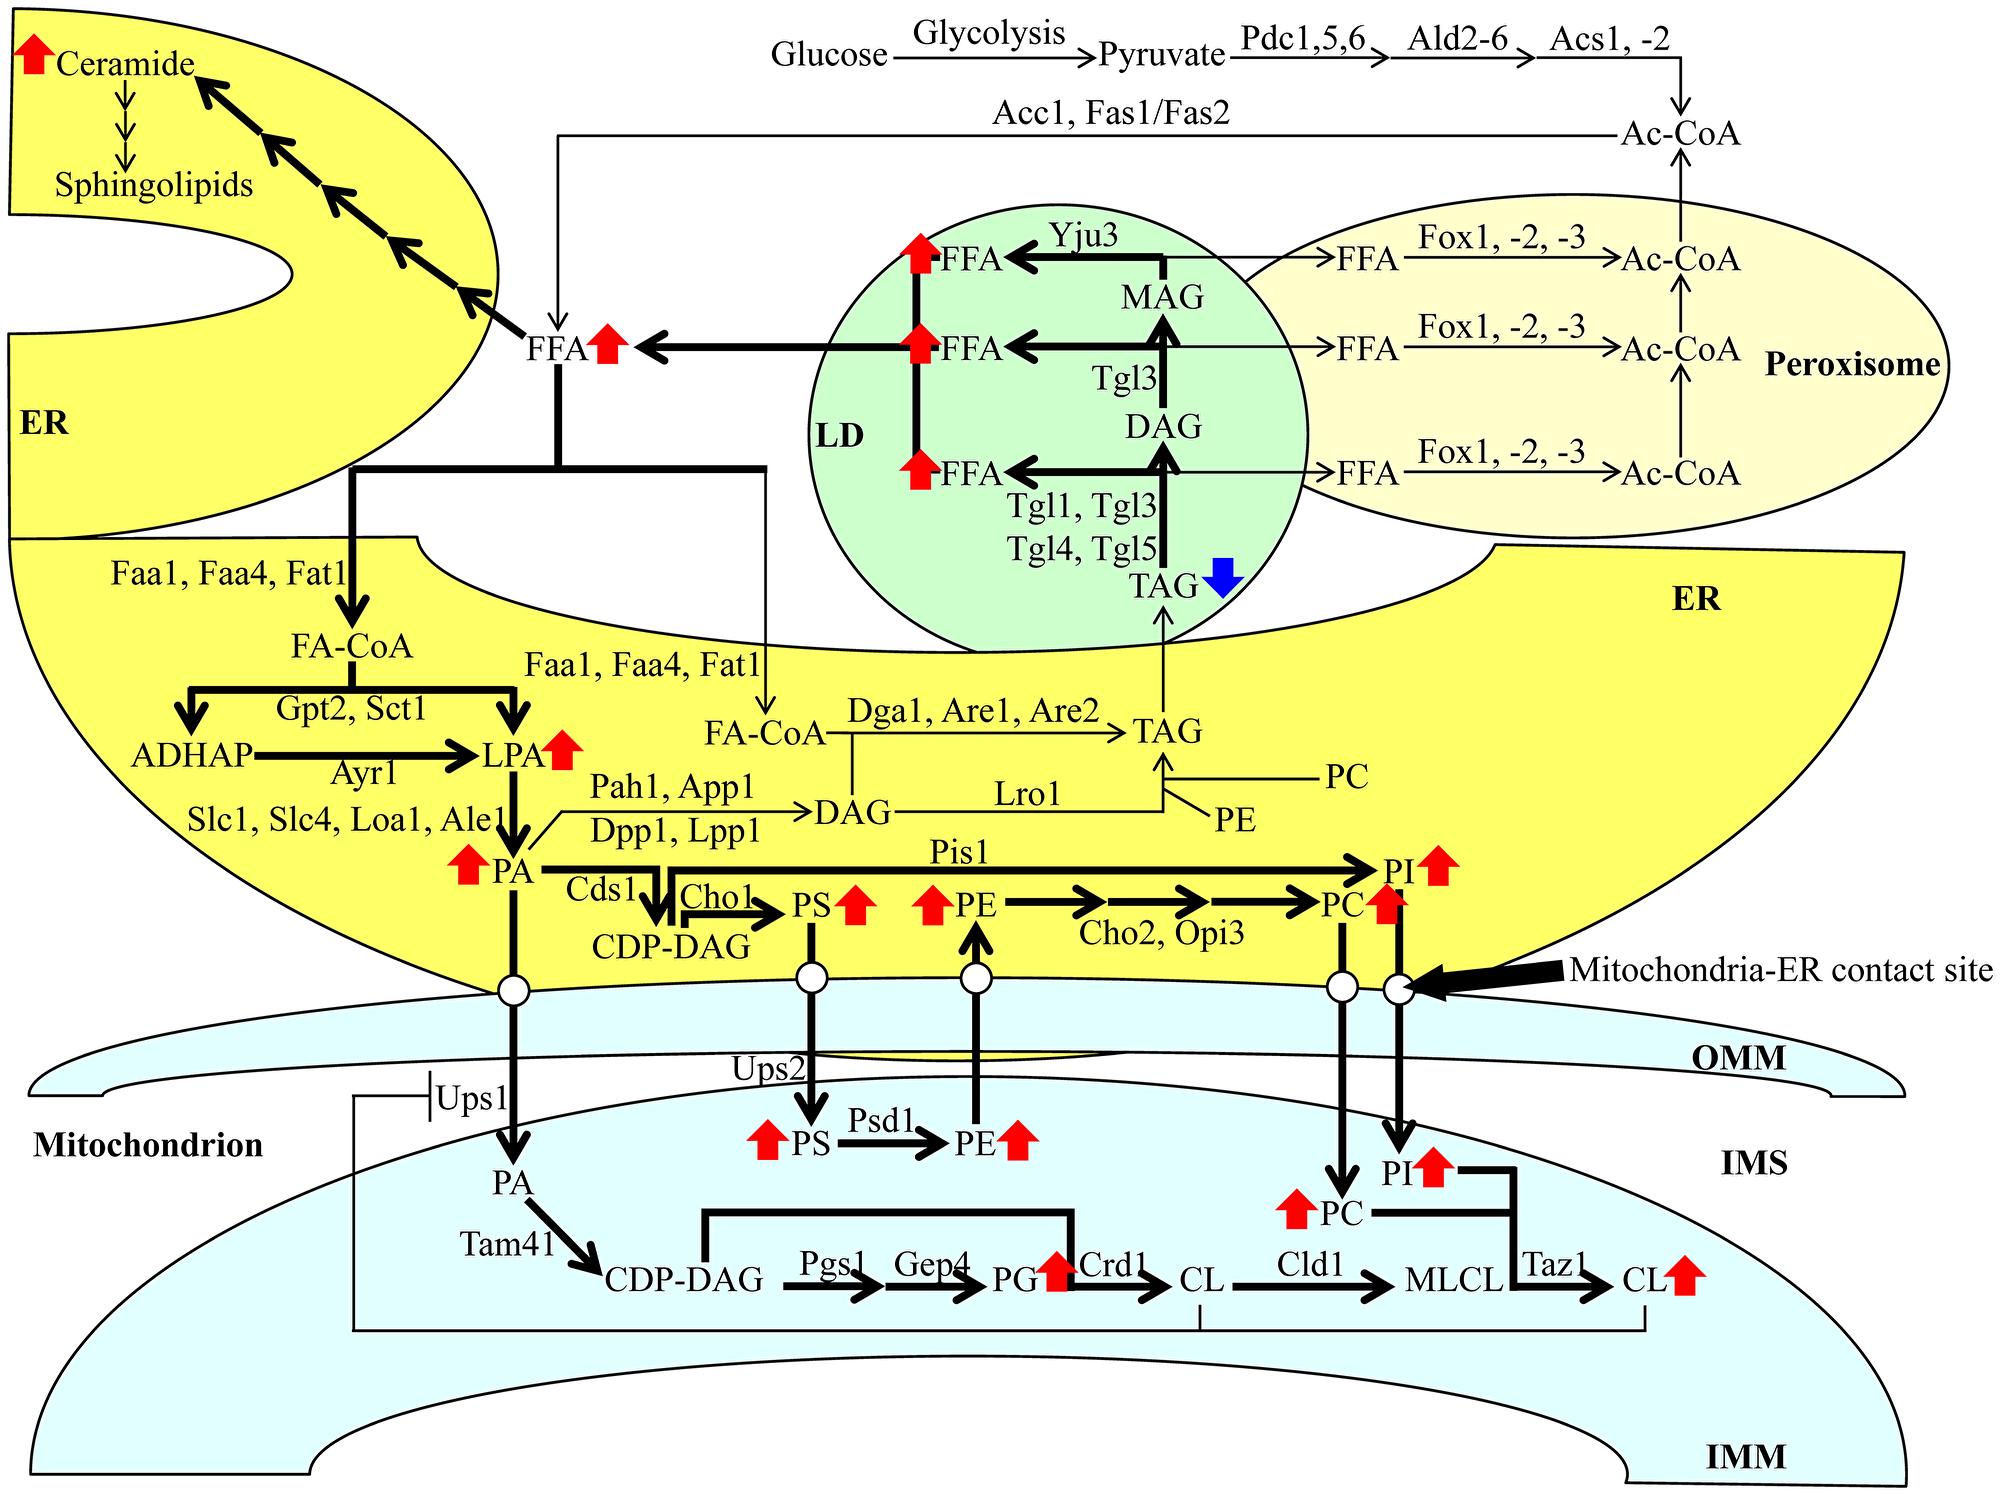 A model for a CR-dependent remodeling of lipid metabolism and transport in HD and LD cells.